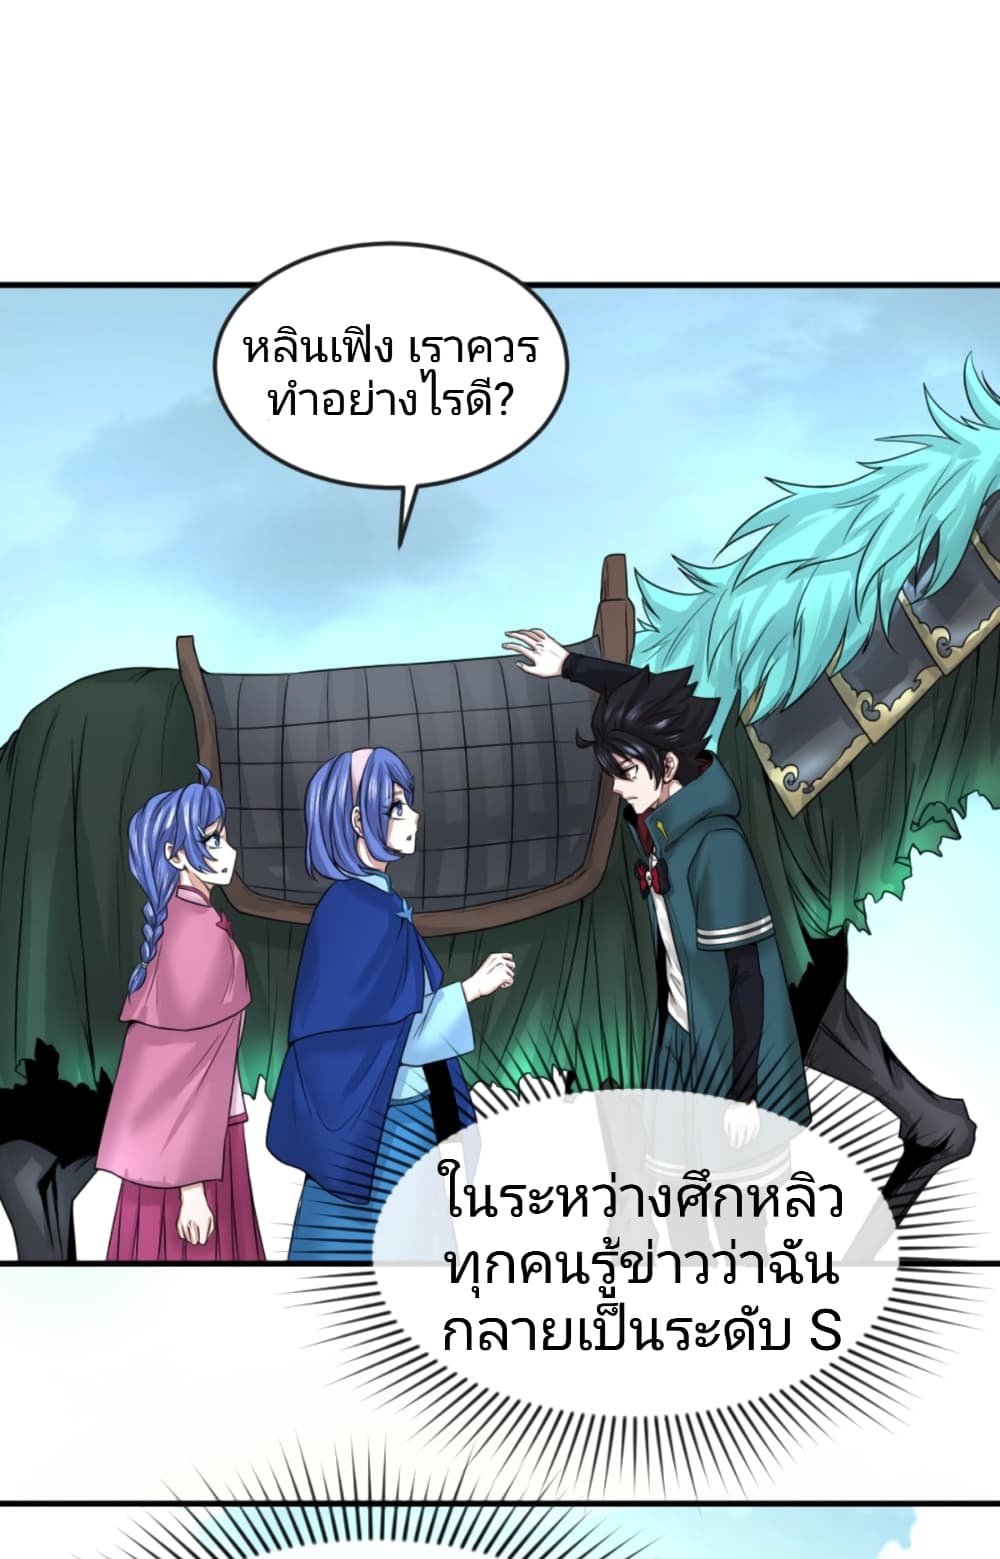 The Age of Ghost Spirits à¸à¸­à¸à¸à¸µà¹ 42 (9)